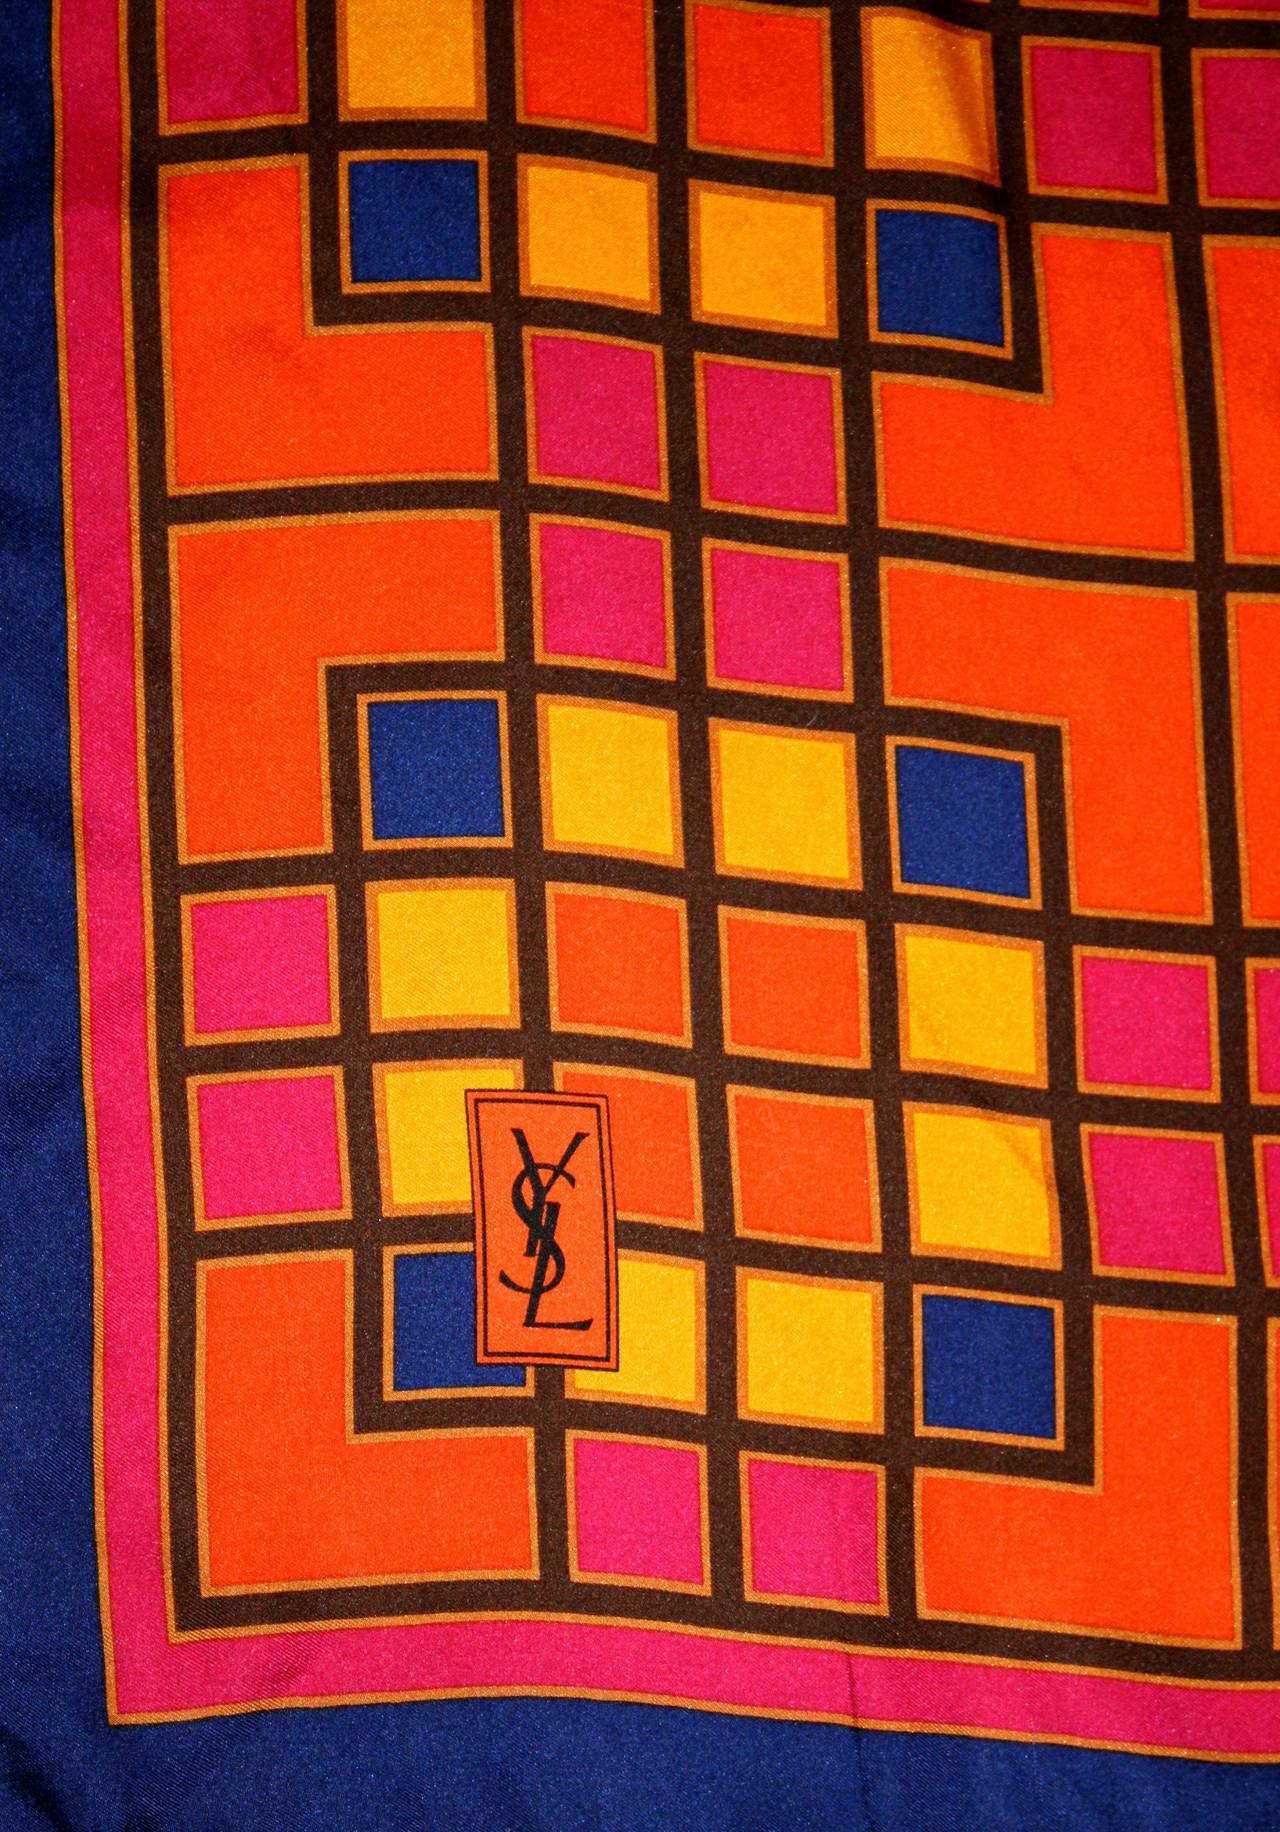 Vintage Yves Saint Laurent silk scarf, displaying signature YSL Mondrian-Inspired print! Gorgeous, vibrant hues of blues, pinks, oranges and yellows! The perfect accessory to any outfit! Can be worn a variety of ways. In great condition. 
Measures: